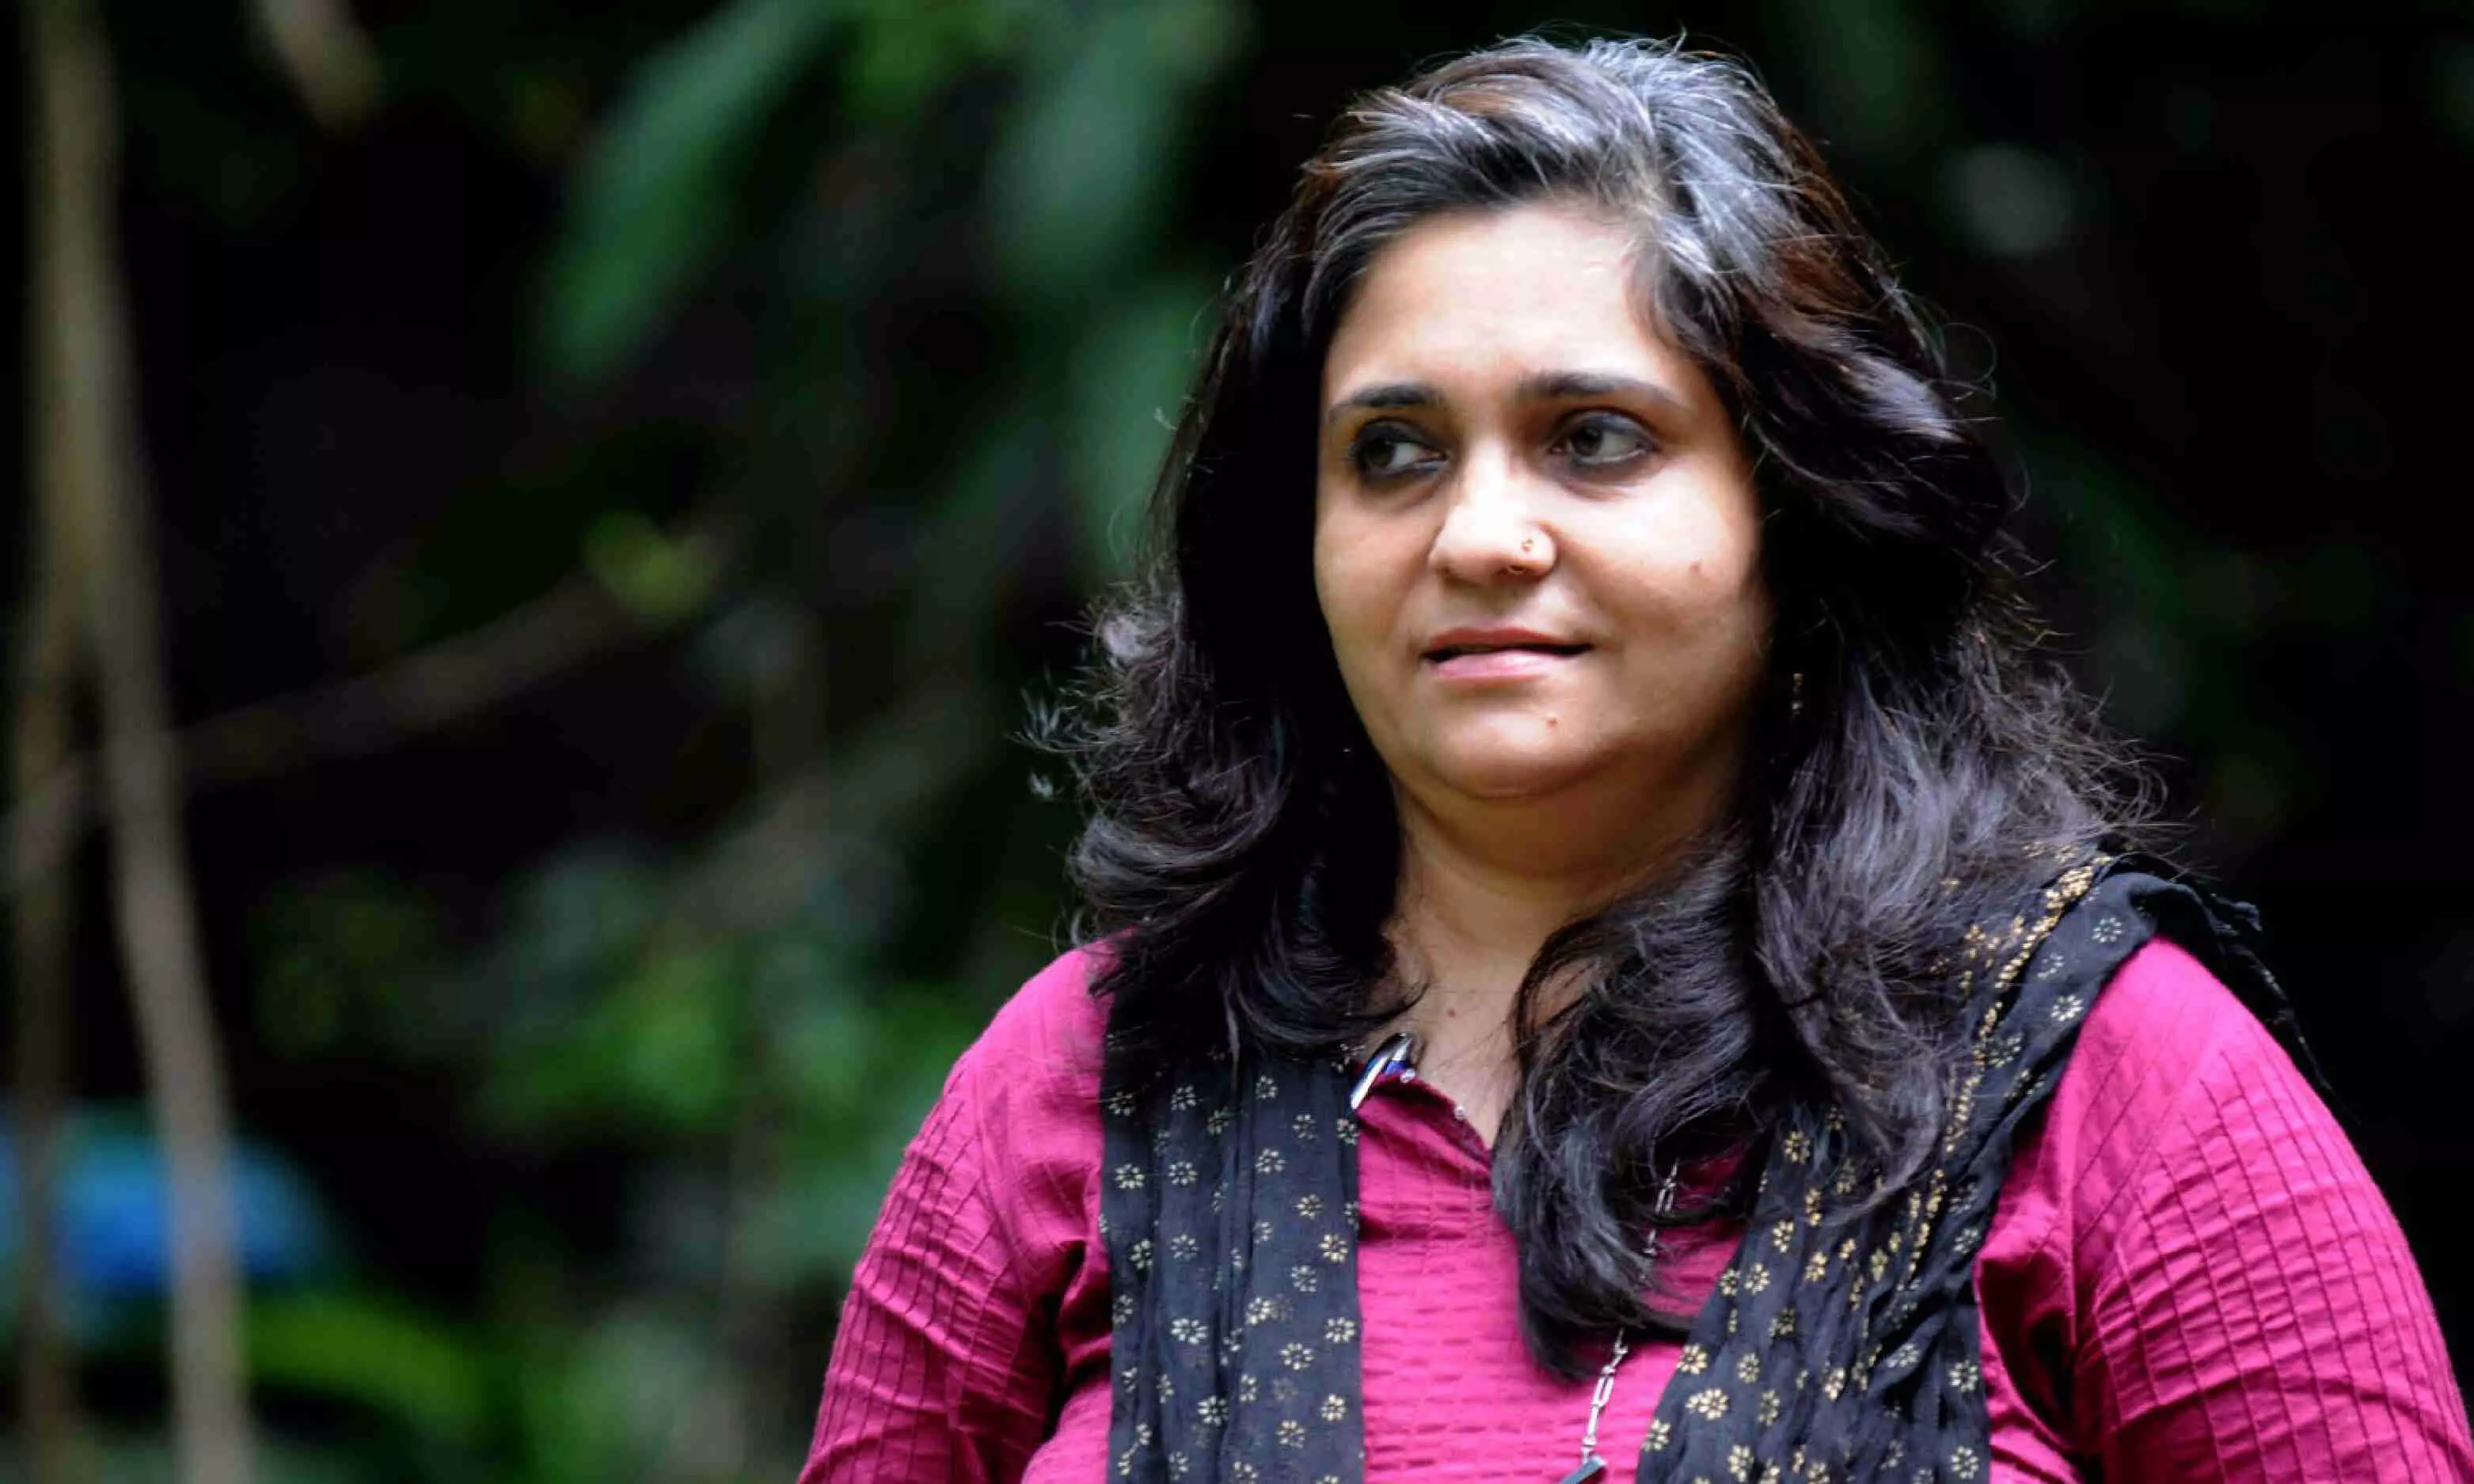 Court Denies Bail To Teesta Setalvad And Sreekumar Accused Of Fabricating Evidence Relating To 2002 Riots